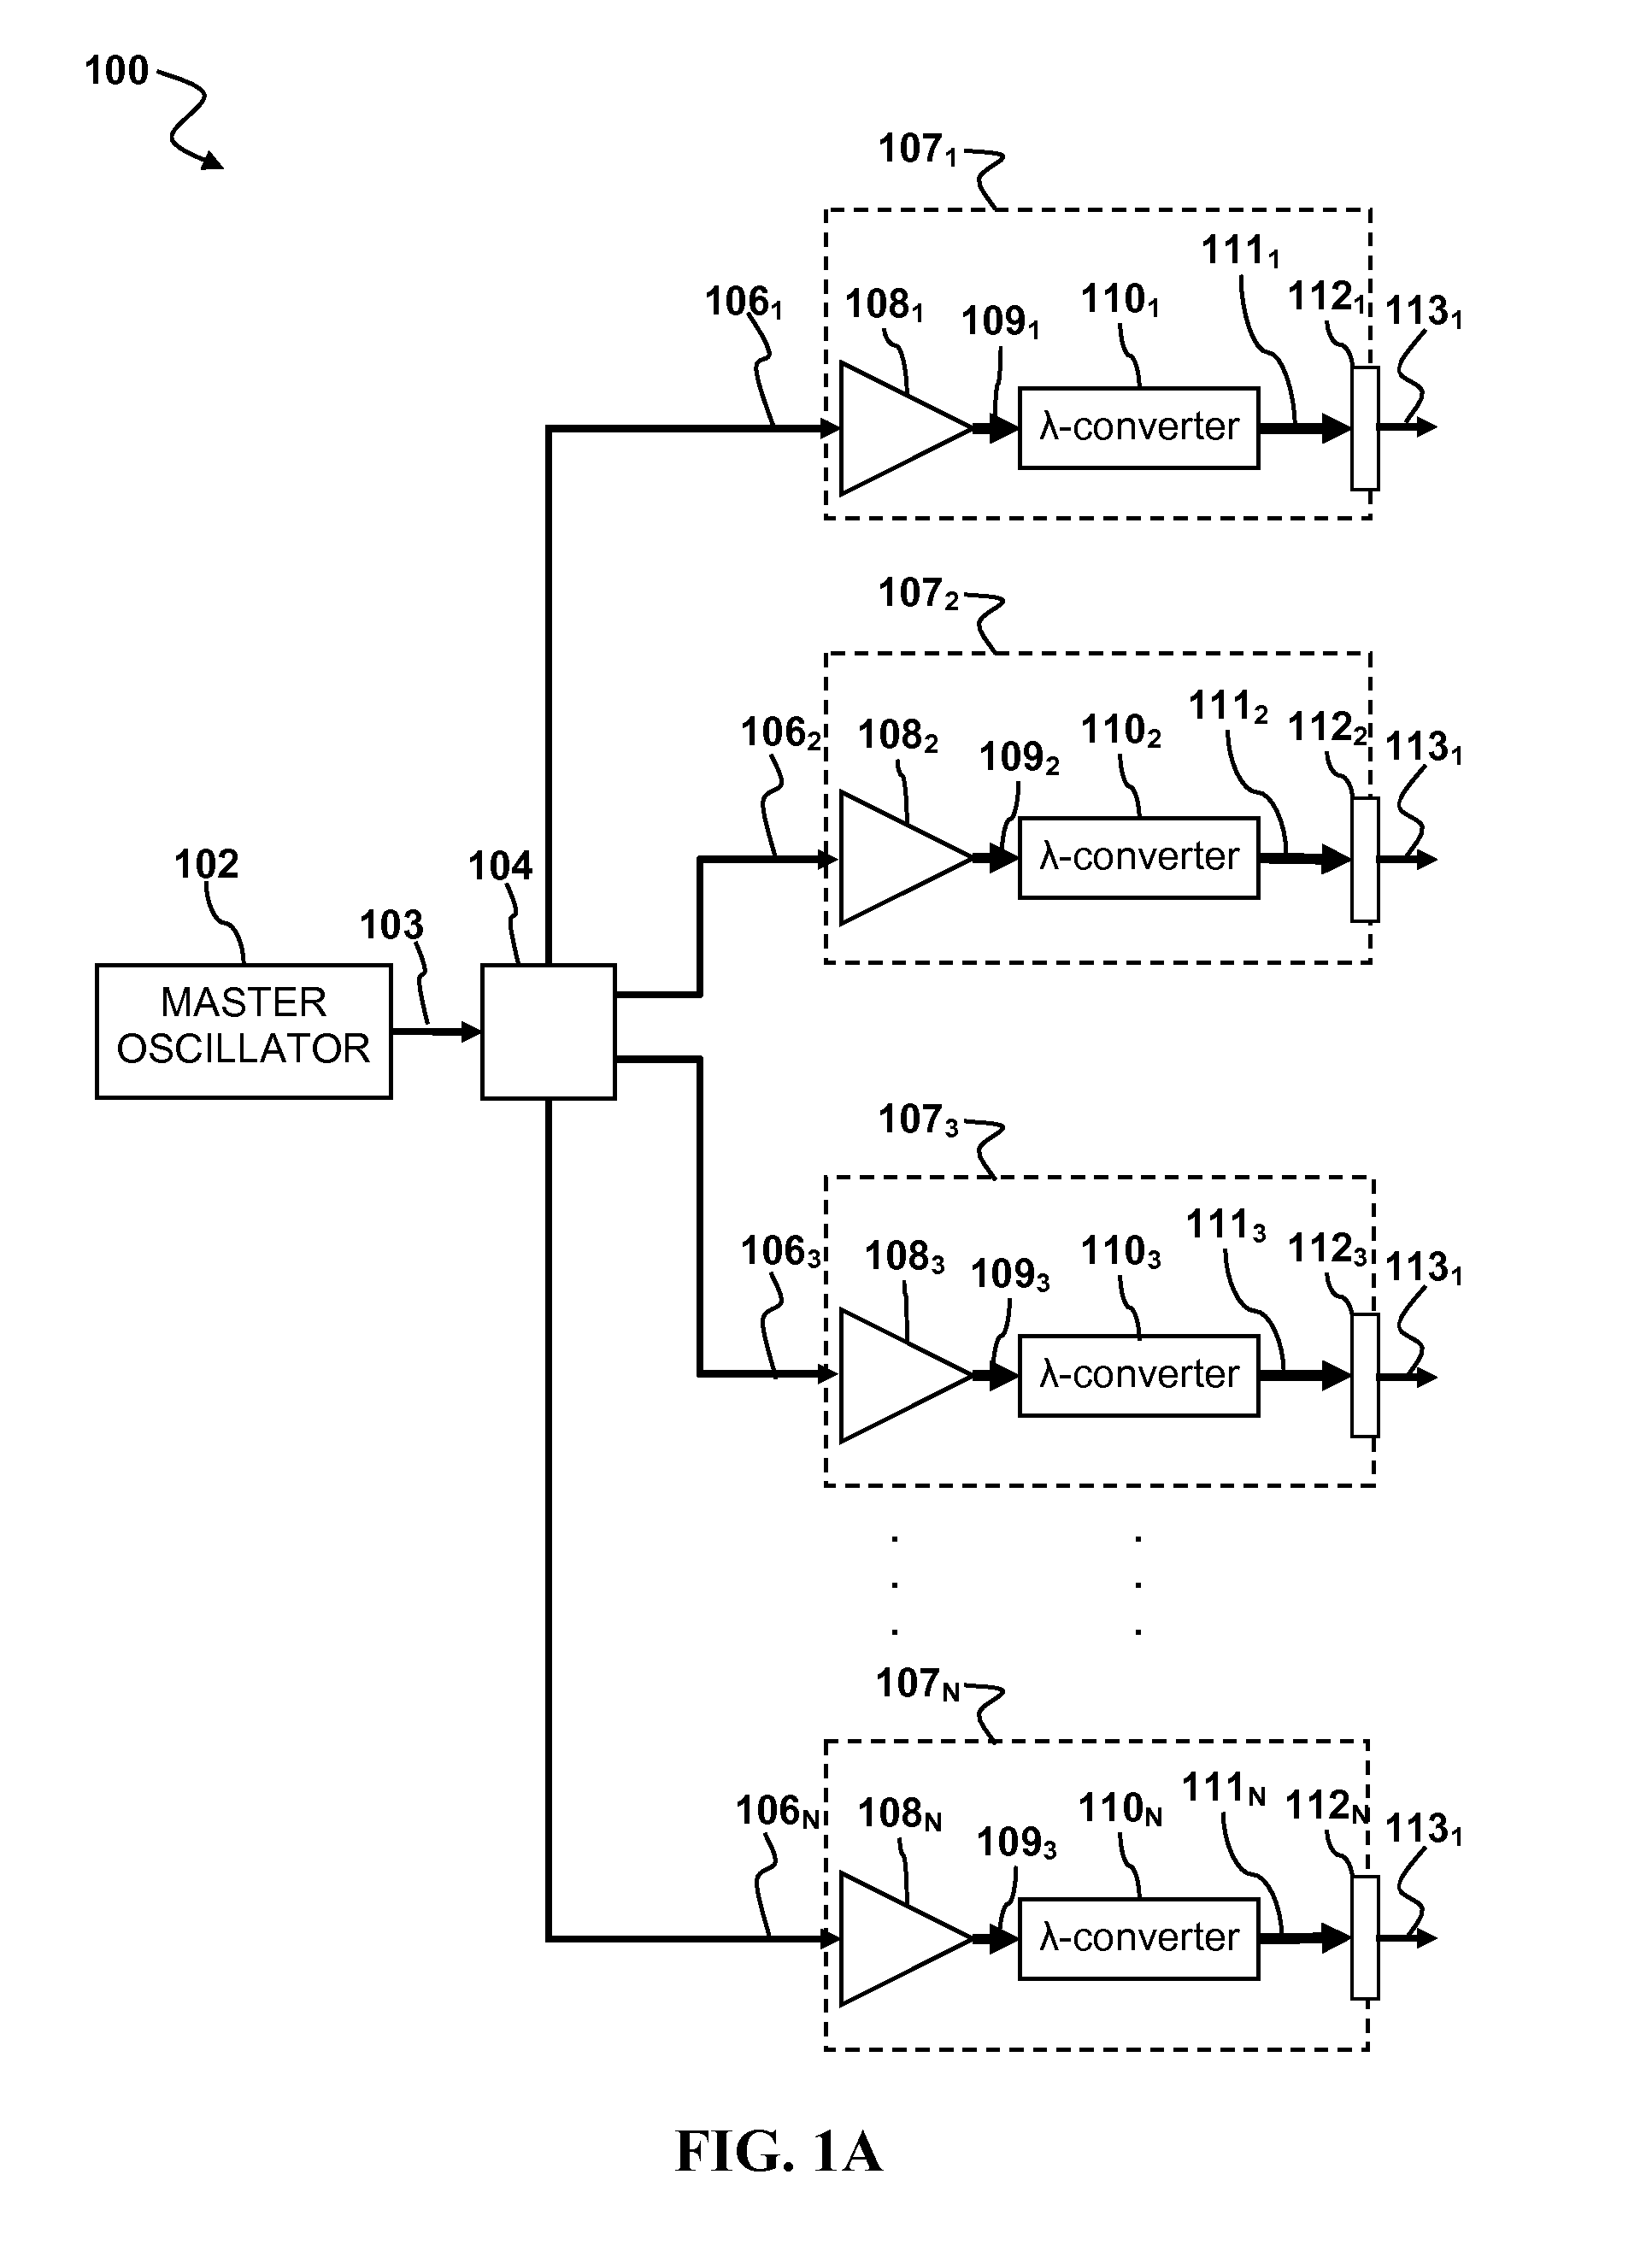 Laser apparatus having multiple synchronous amplifiers tied to one master oscillator